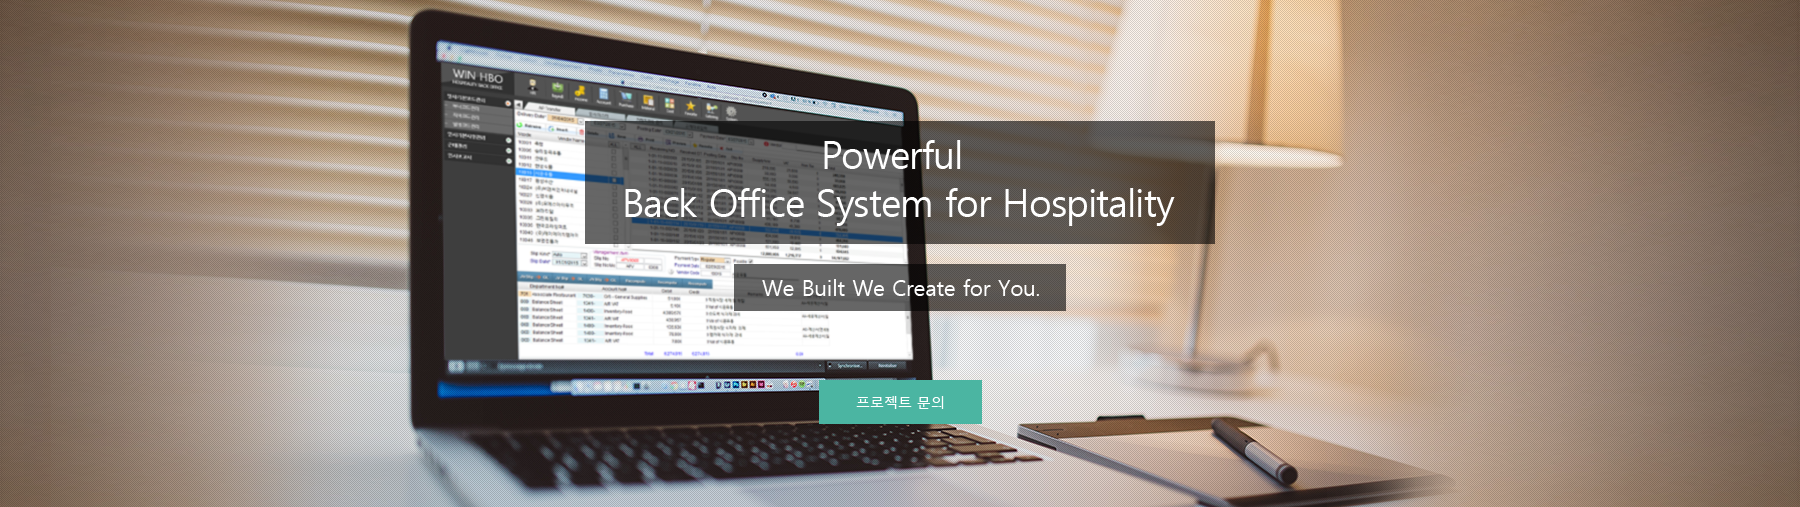 Powerful Back Office System for Hospitality we Built we create for you